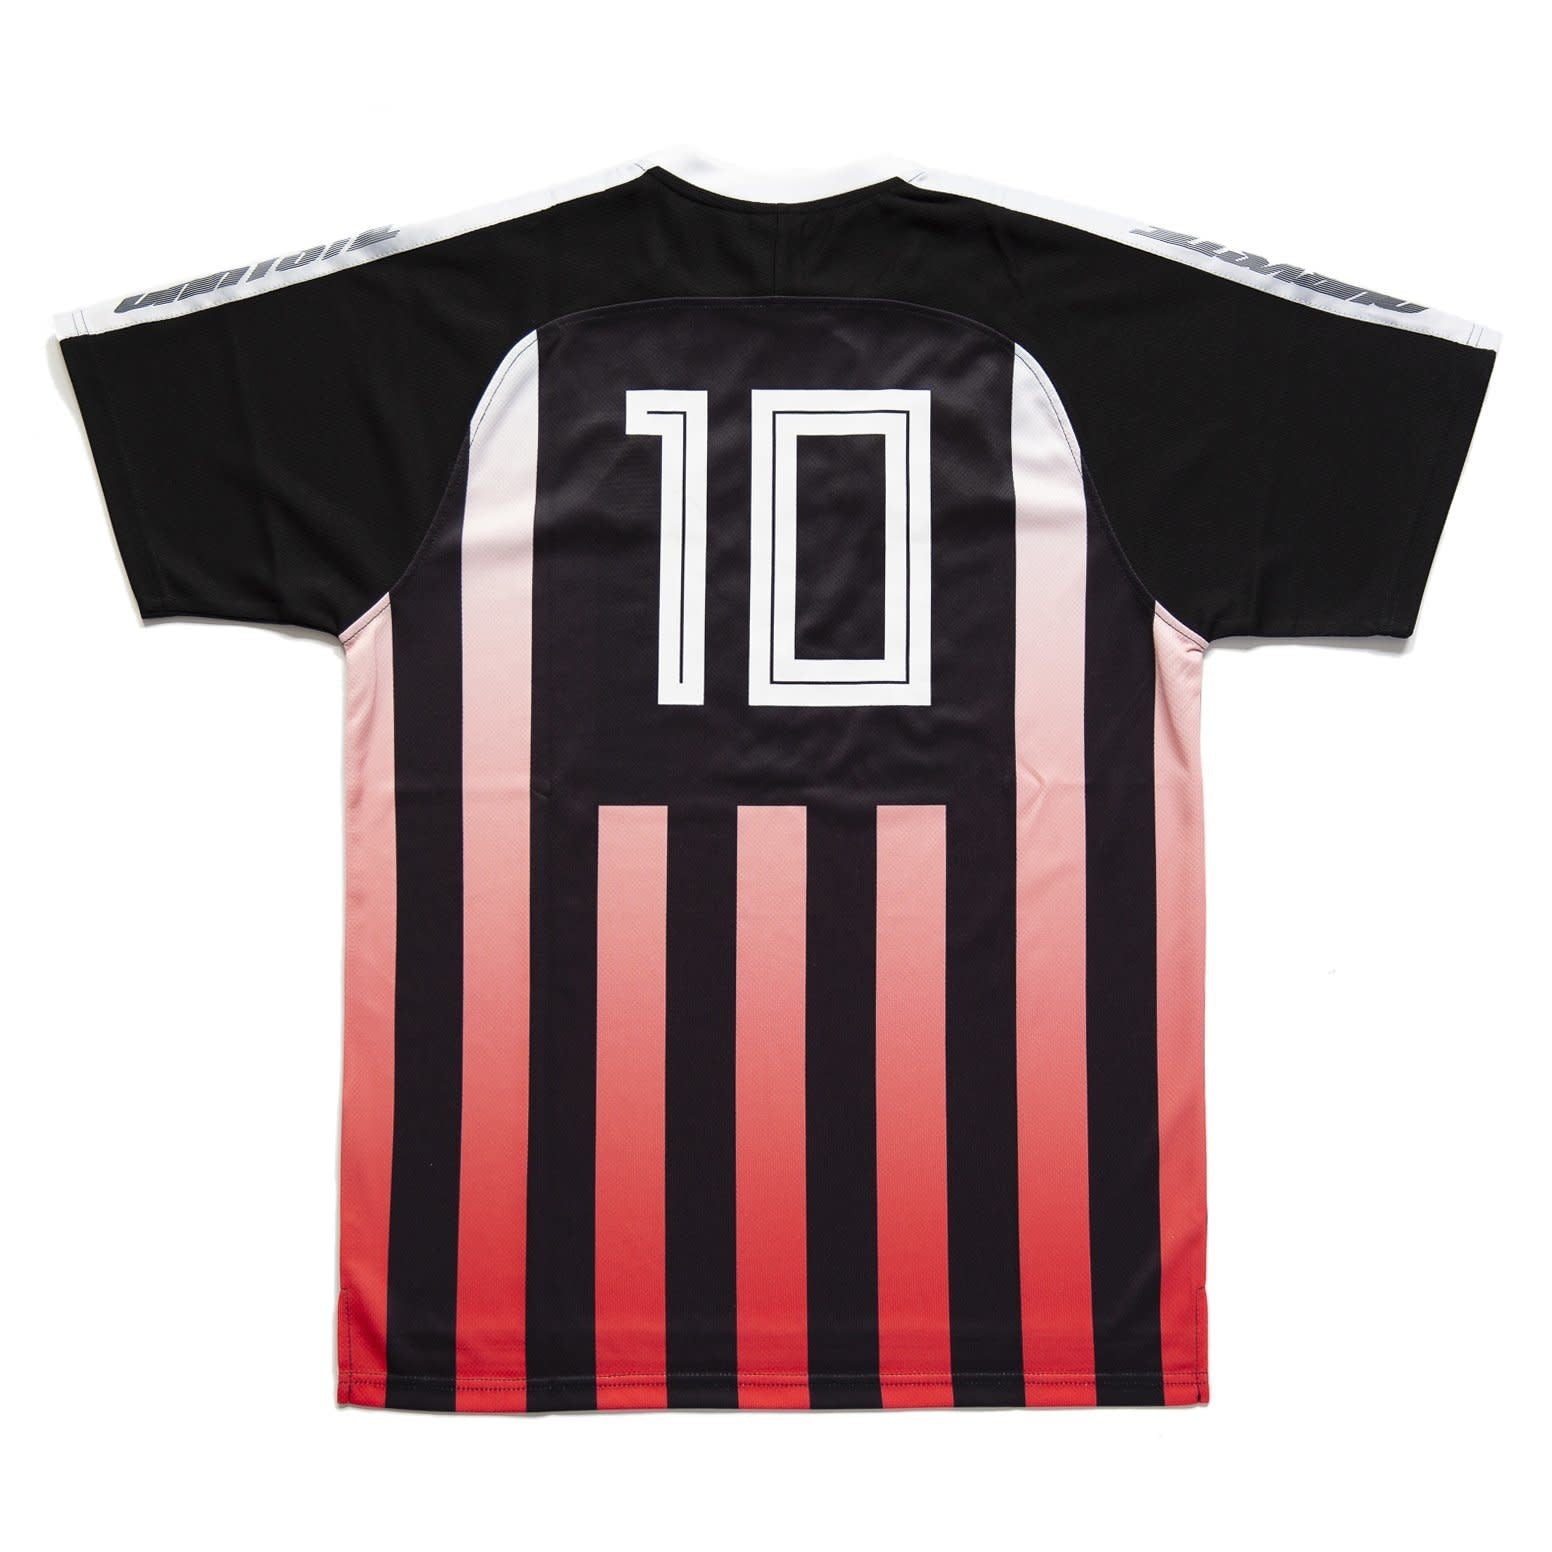 Chrystie NYC Soccer Jersey Red Ombre